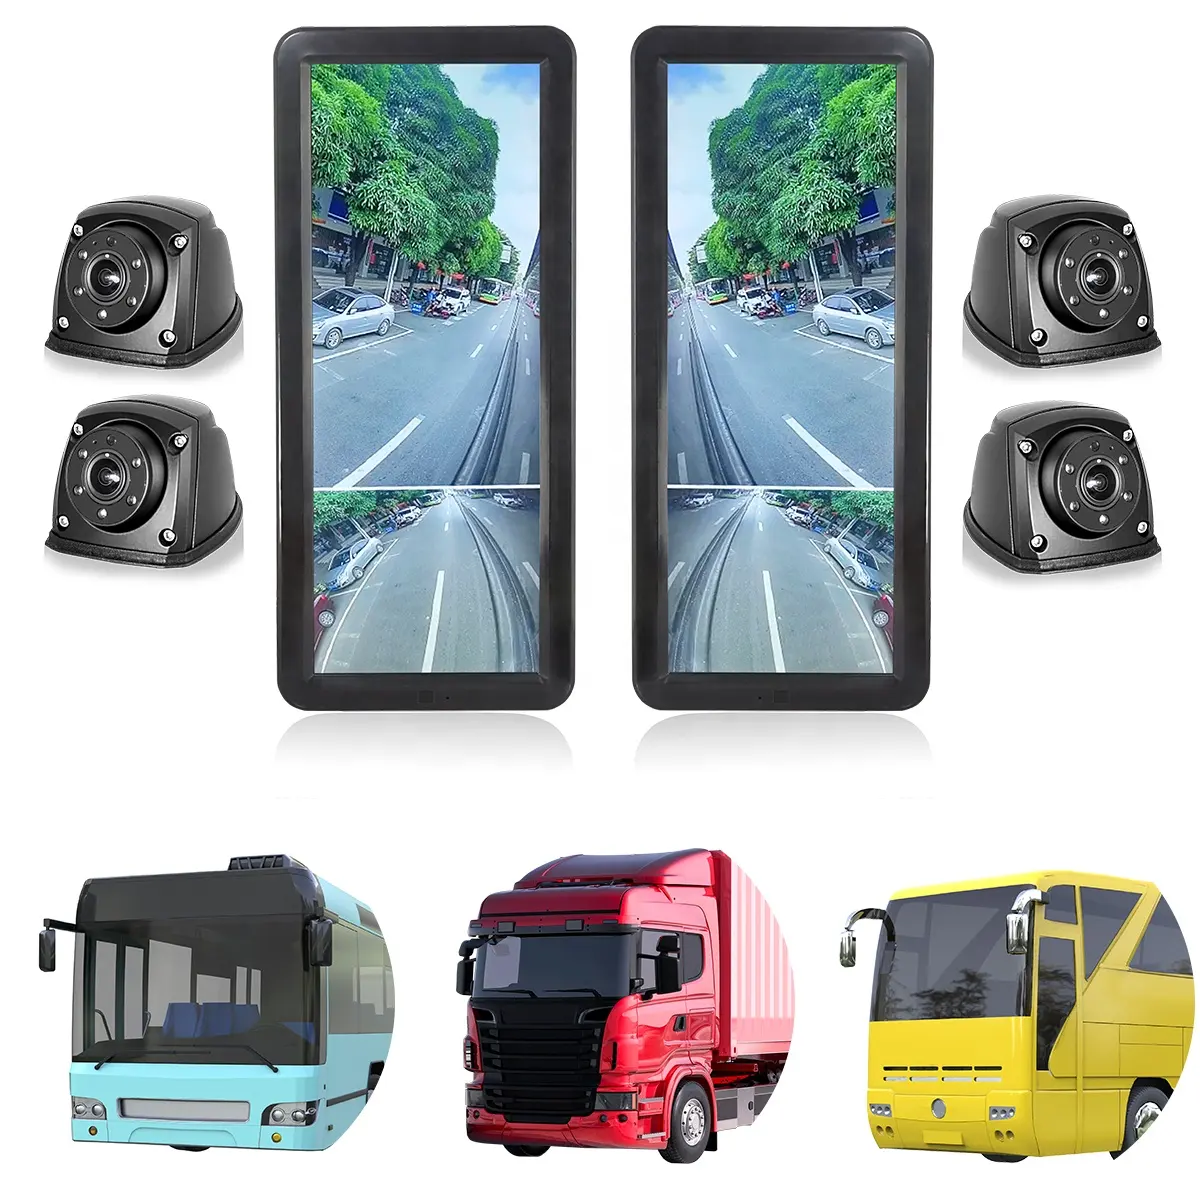 STONKAM truck side bus truck electronic mirror camera rear view in-cab mirror monitor wide angle